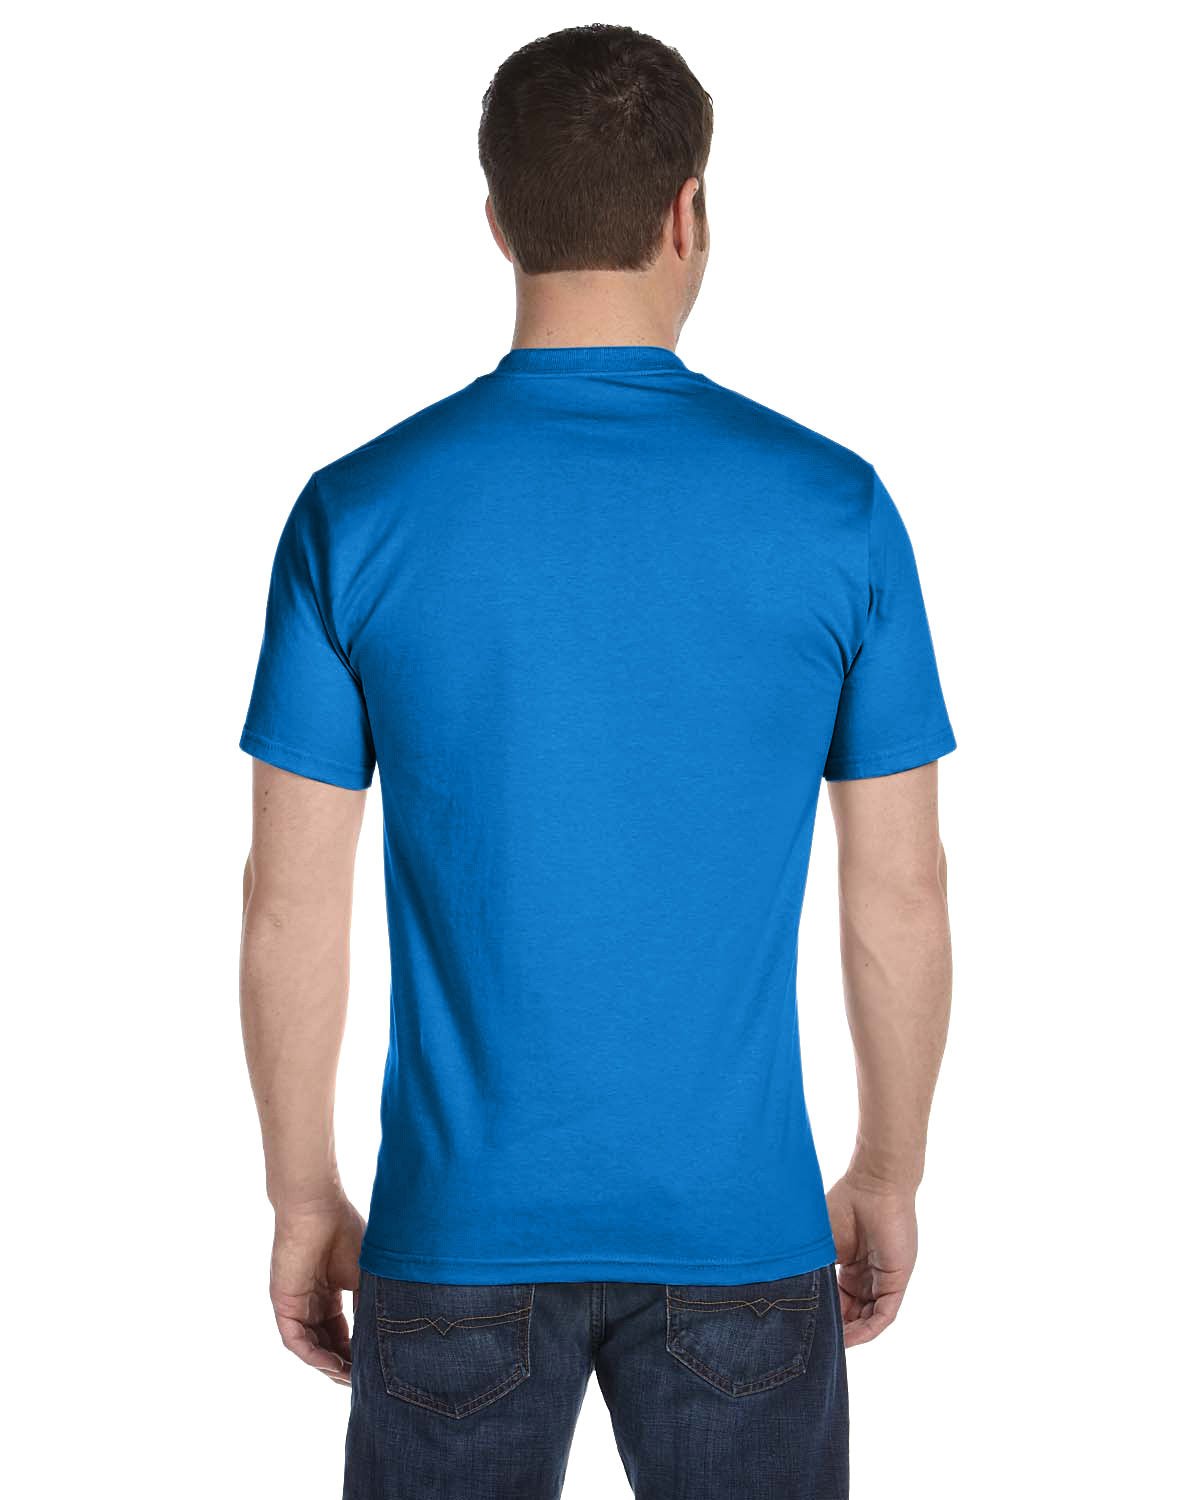 5280-Hanes-BLUEBELL BREEZE-Hanes-T-Shirts-2